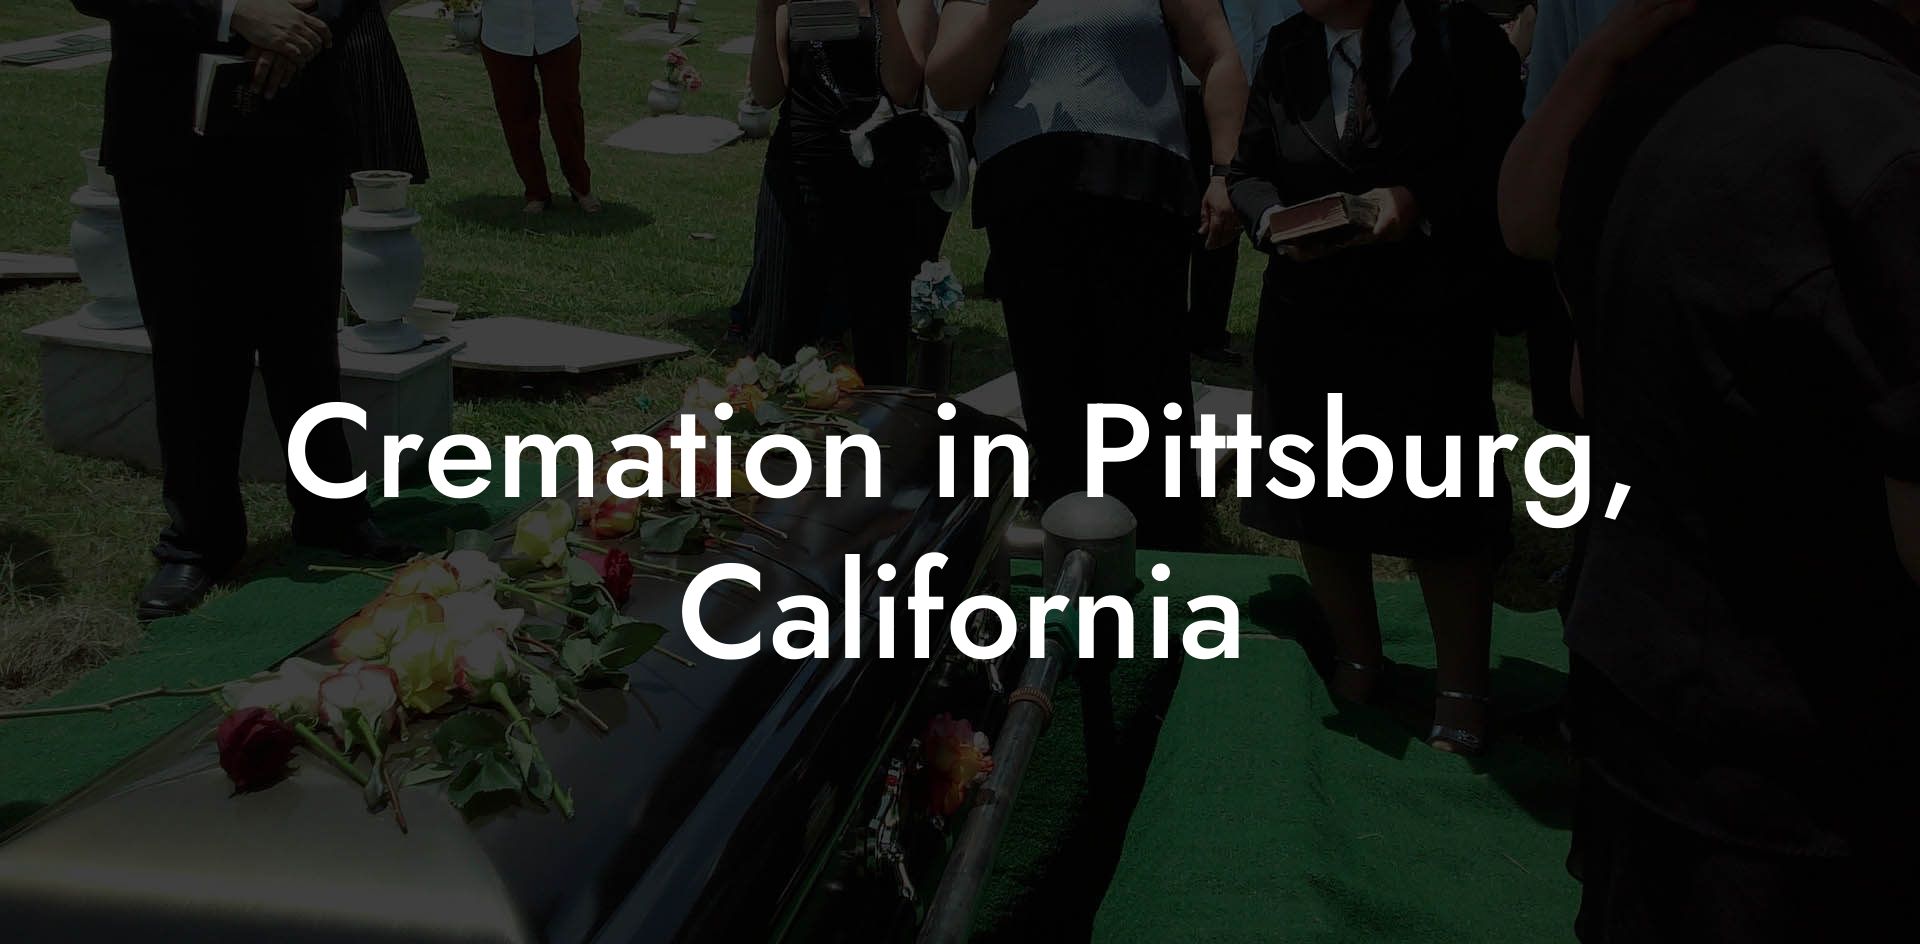 Cremation in Pittsburg, California